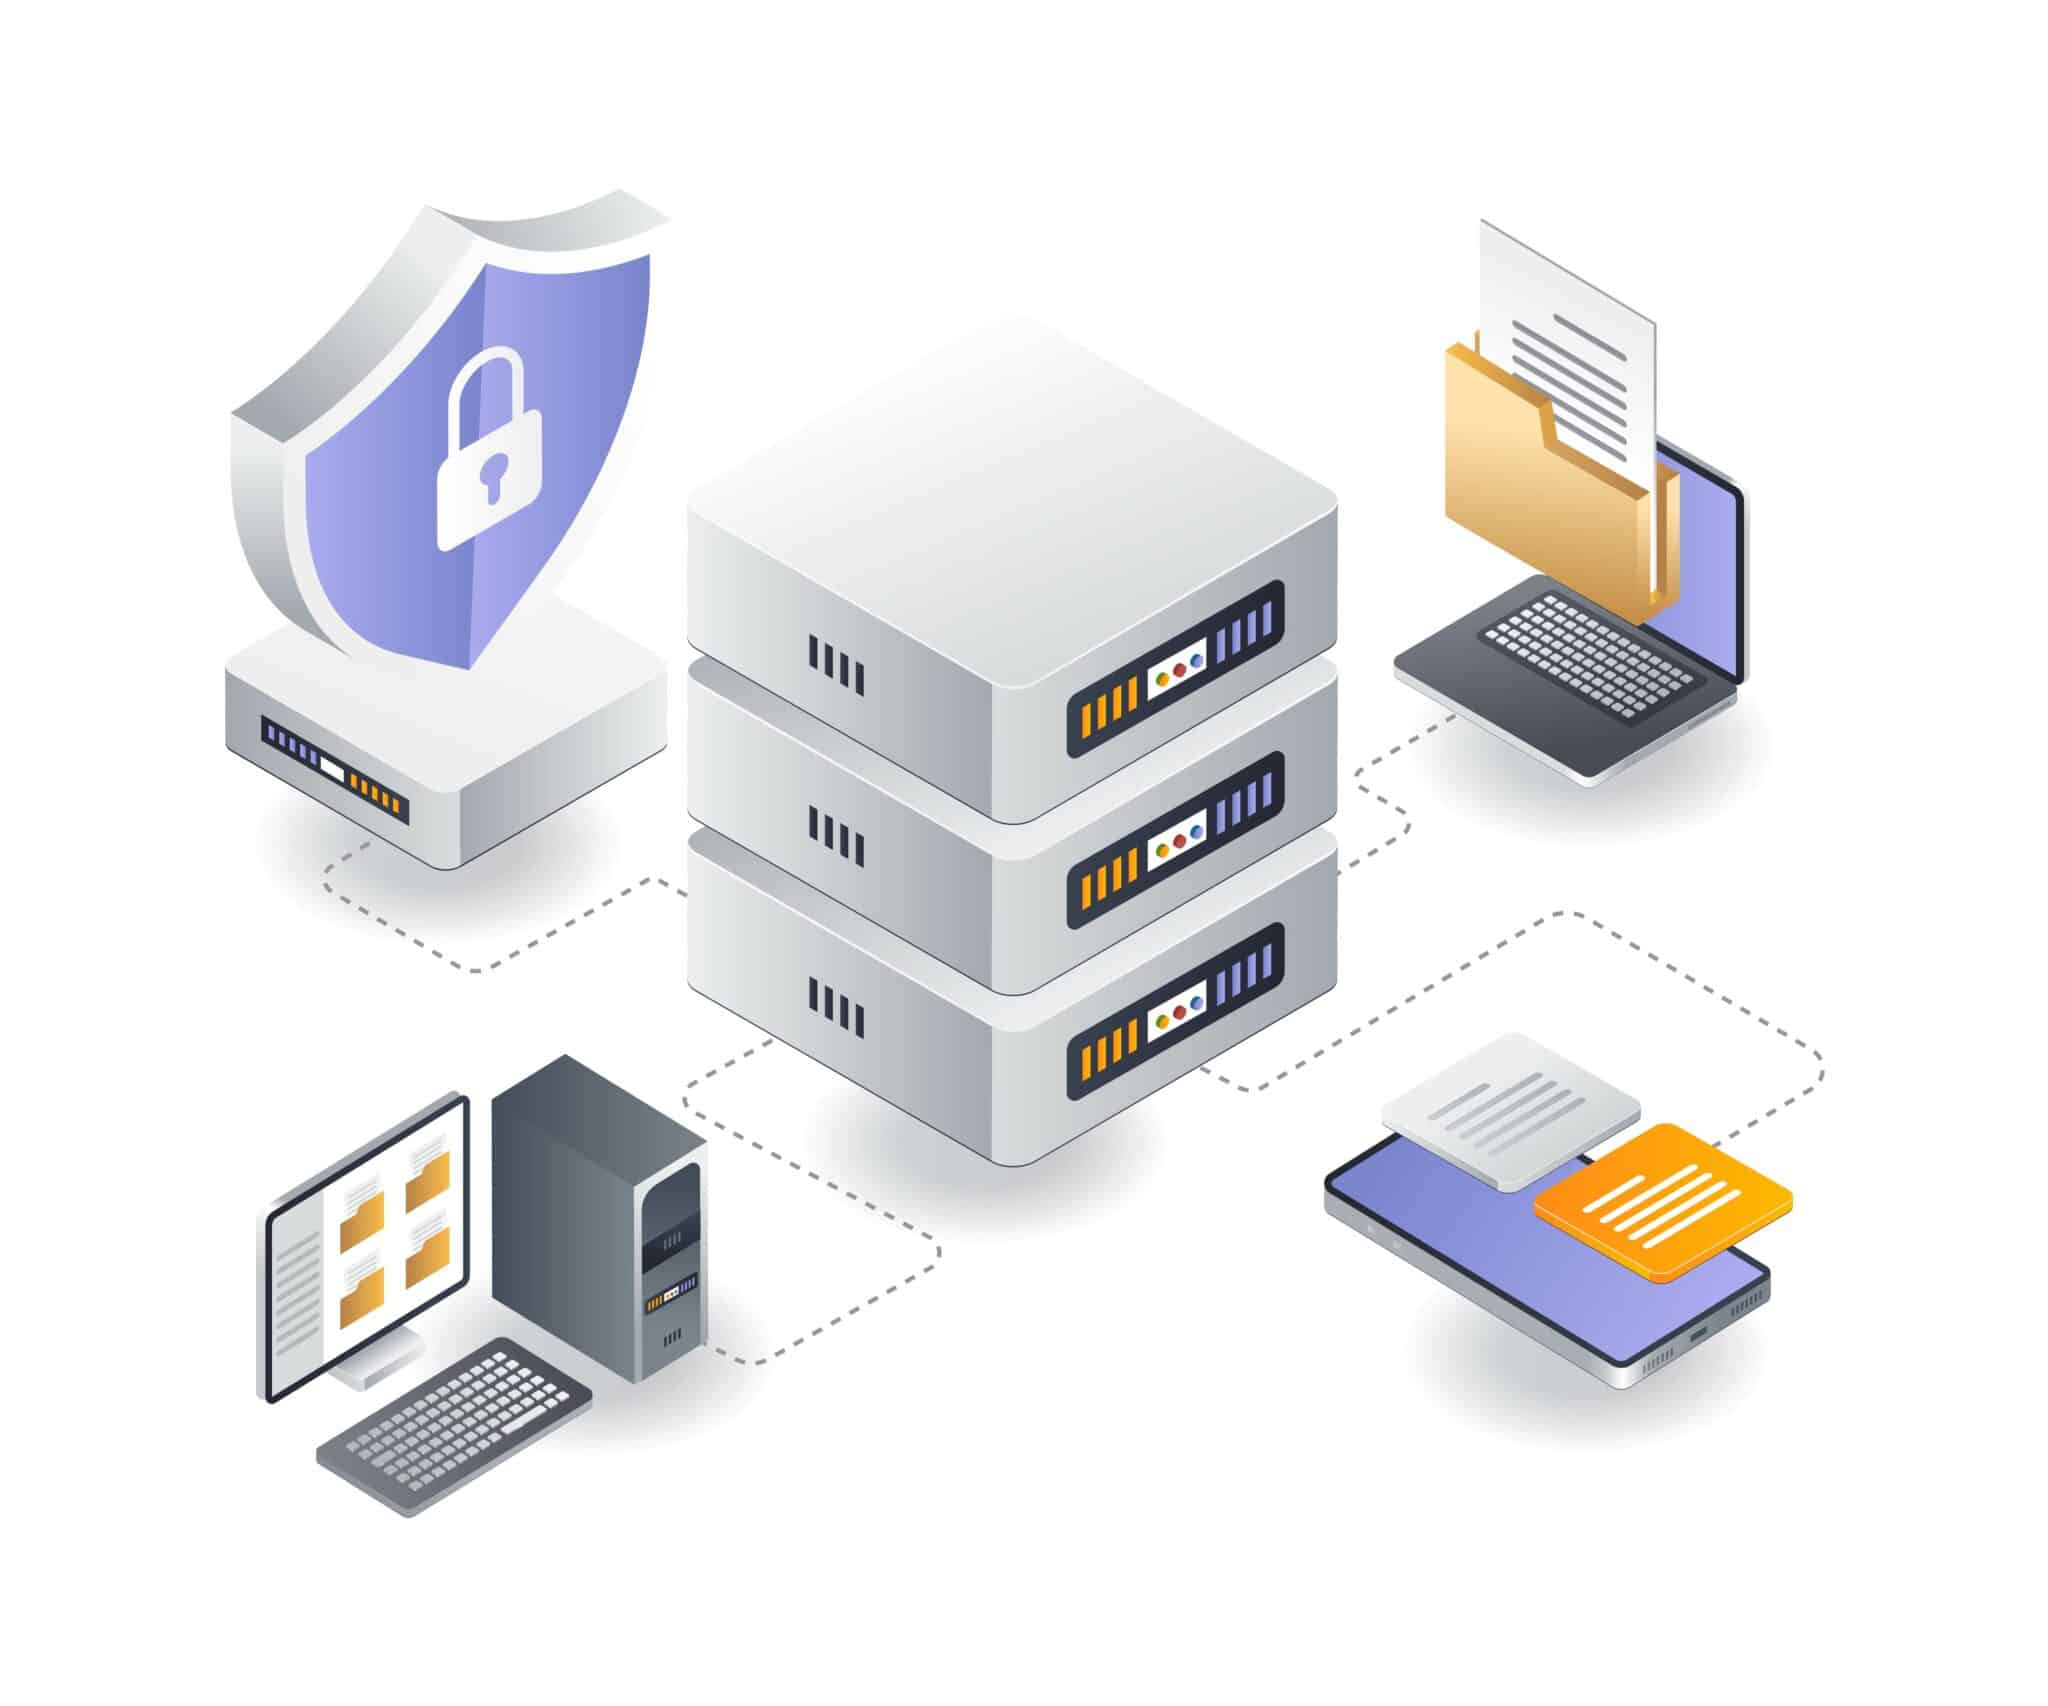 Flat isometric illustration concept of secure computer network for video transcription services.